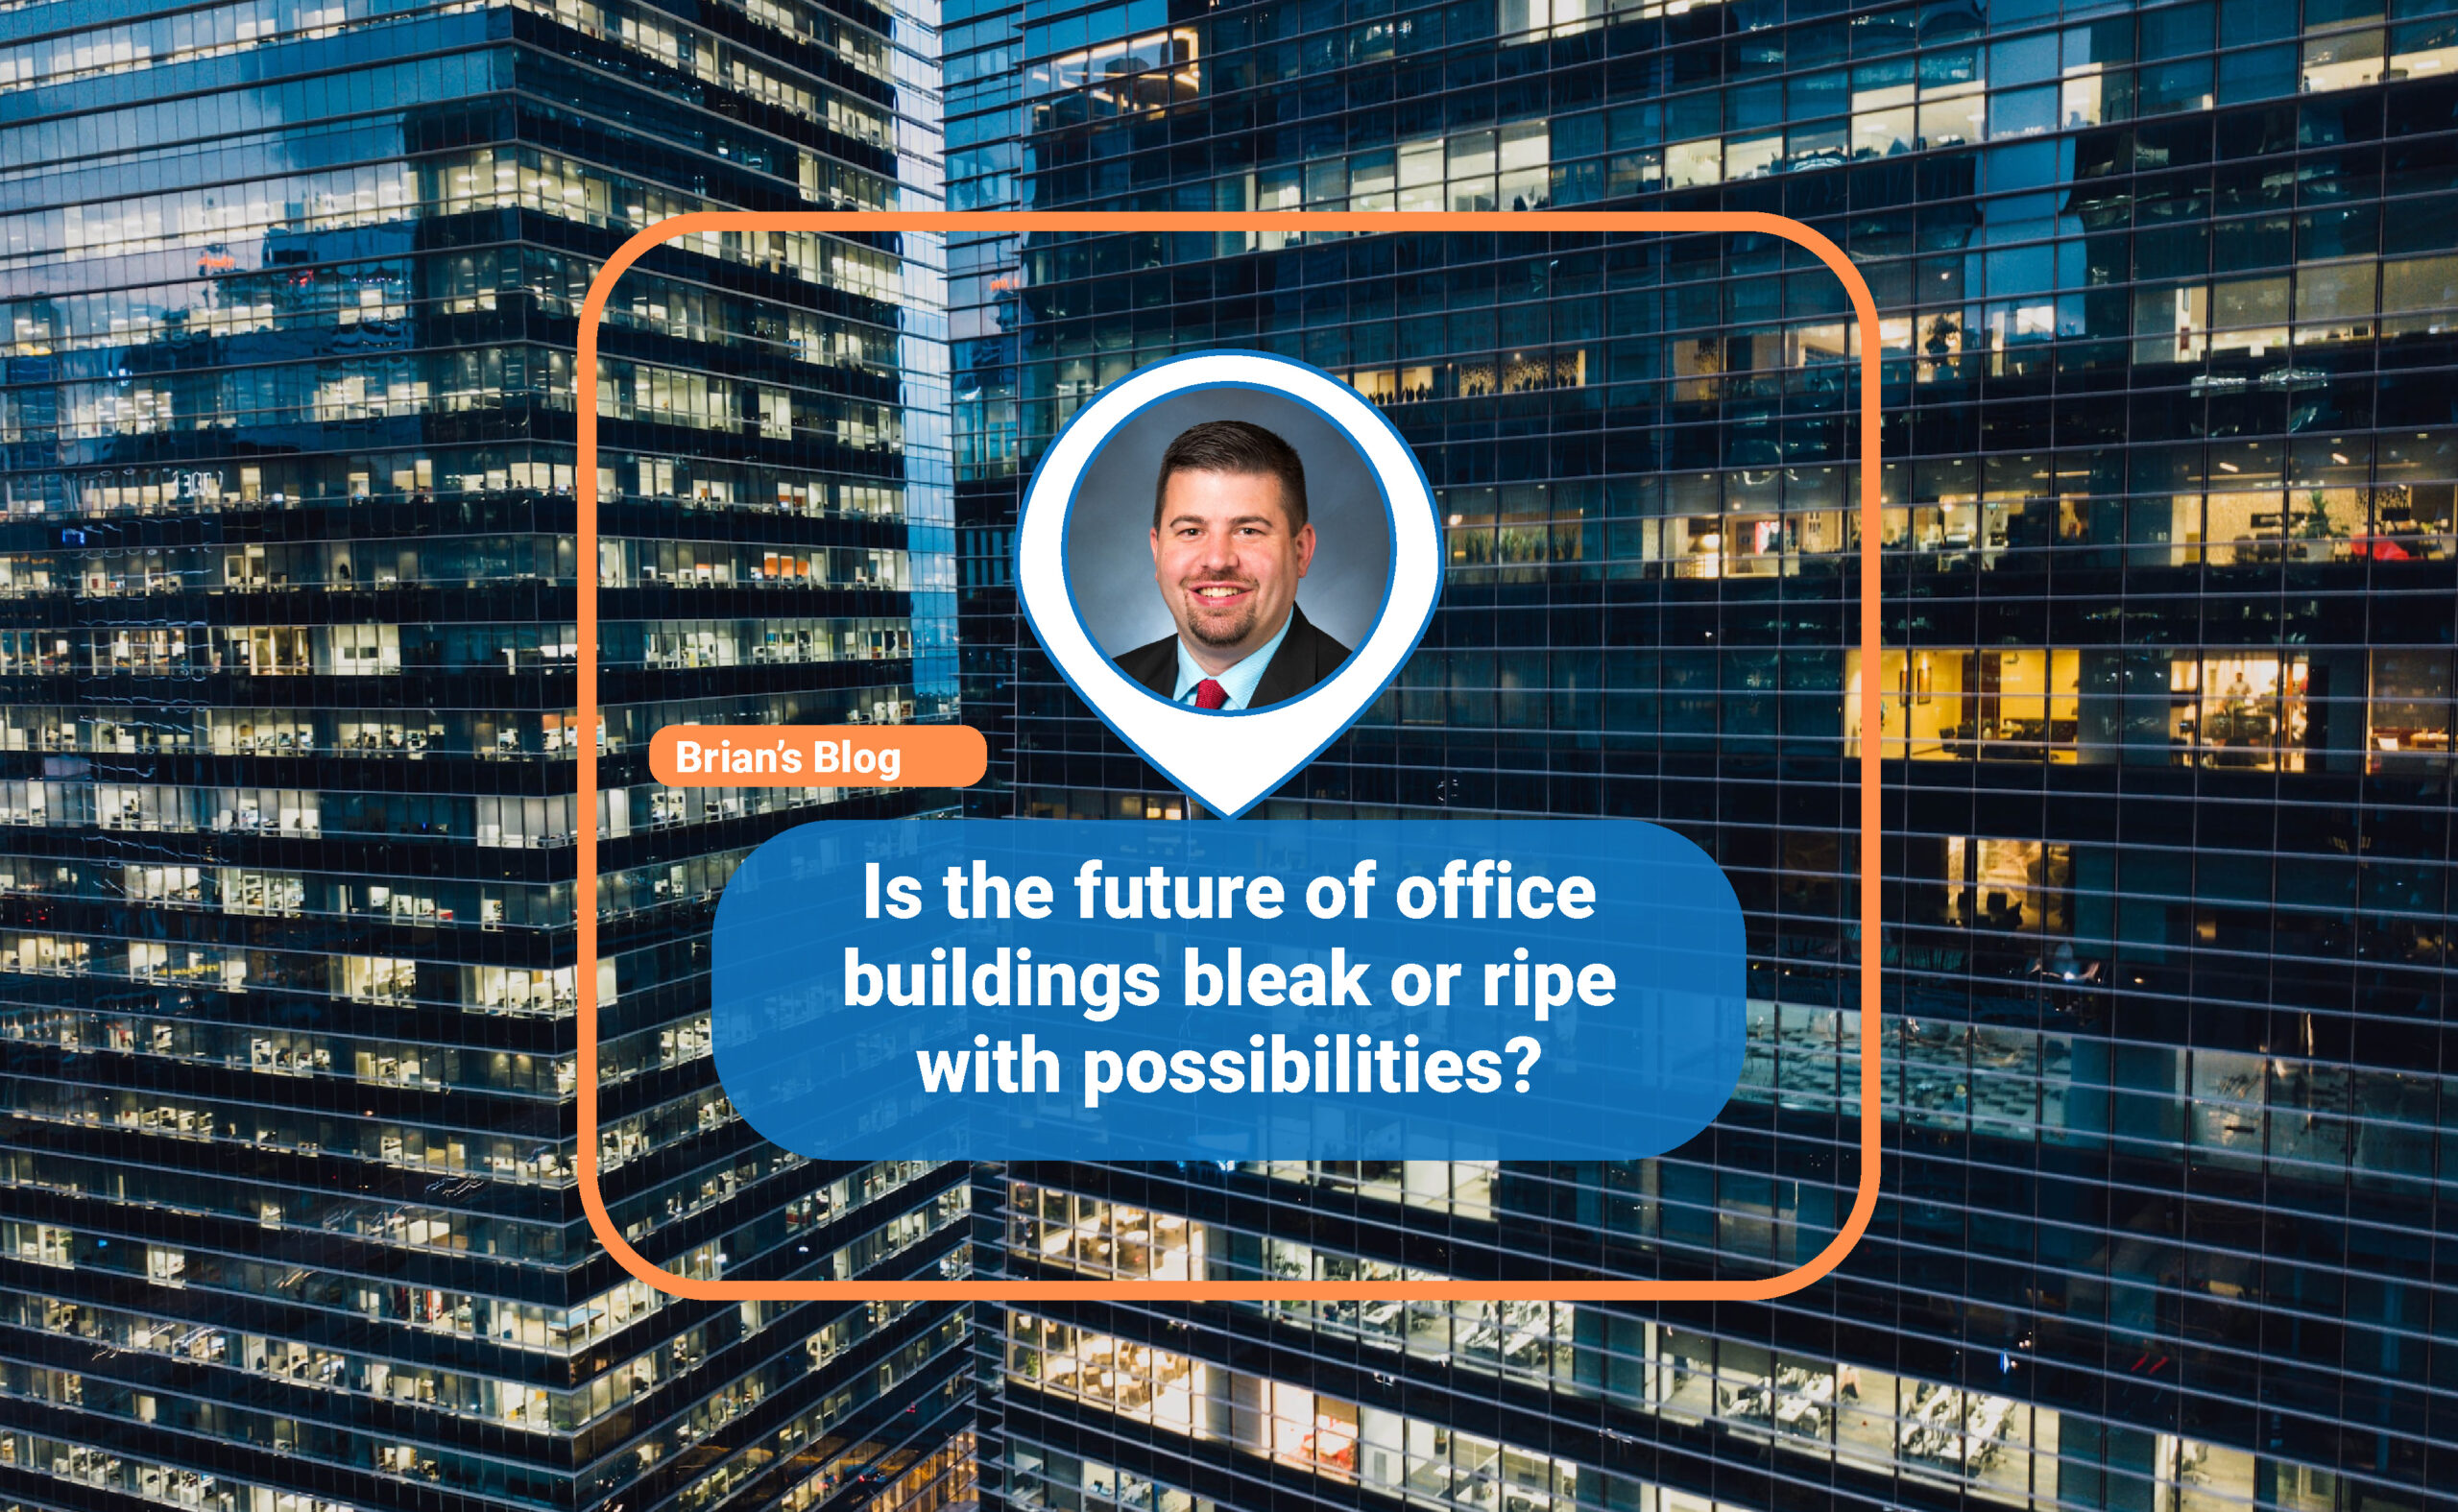 Is the future of office buildings bleak or ripe with possibilities? 🤔